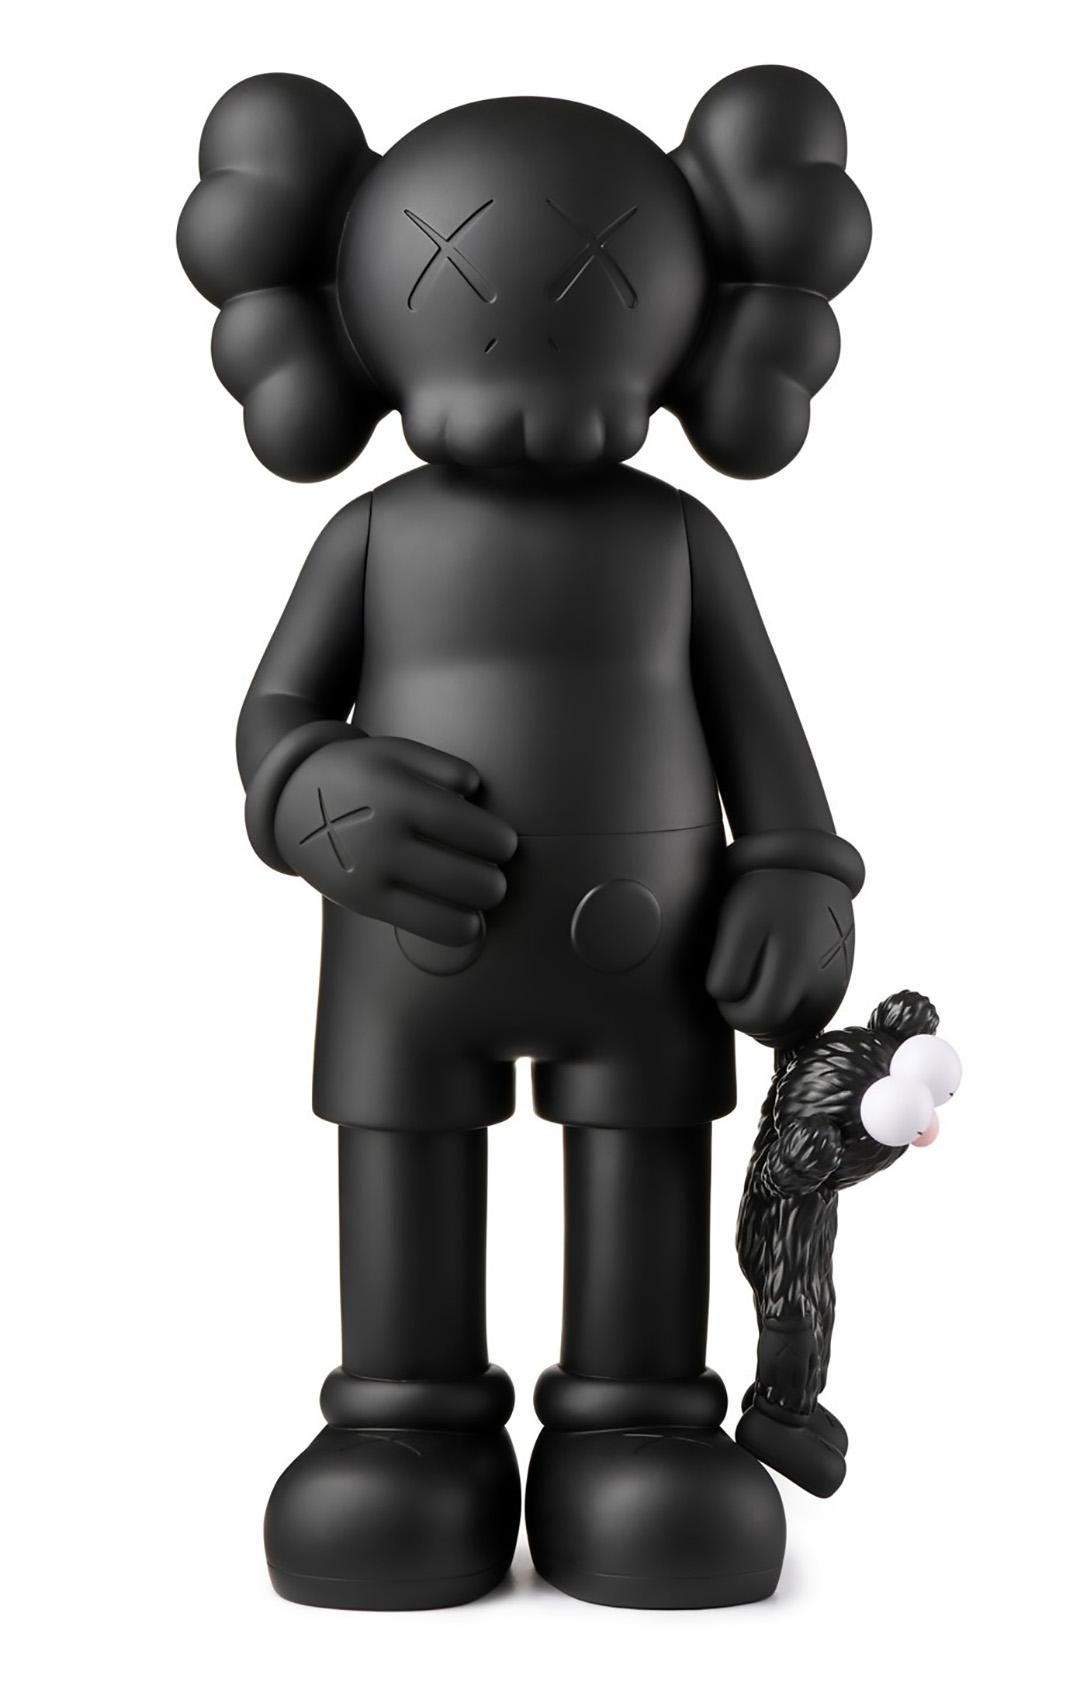 KAWS SHARE: Set of 2; Brown & Black; each new & unopened in its original packaging. 

Medium: Painted Vinyl Cast Resin. 
12.4 x 6.3 inches (applies to each individual).
New, unopened in its original box; excellent condition.  
From a sold out